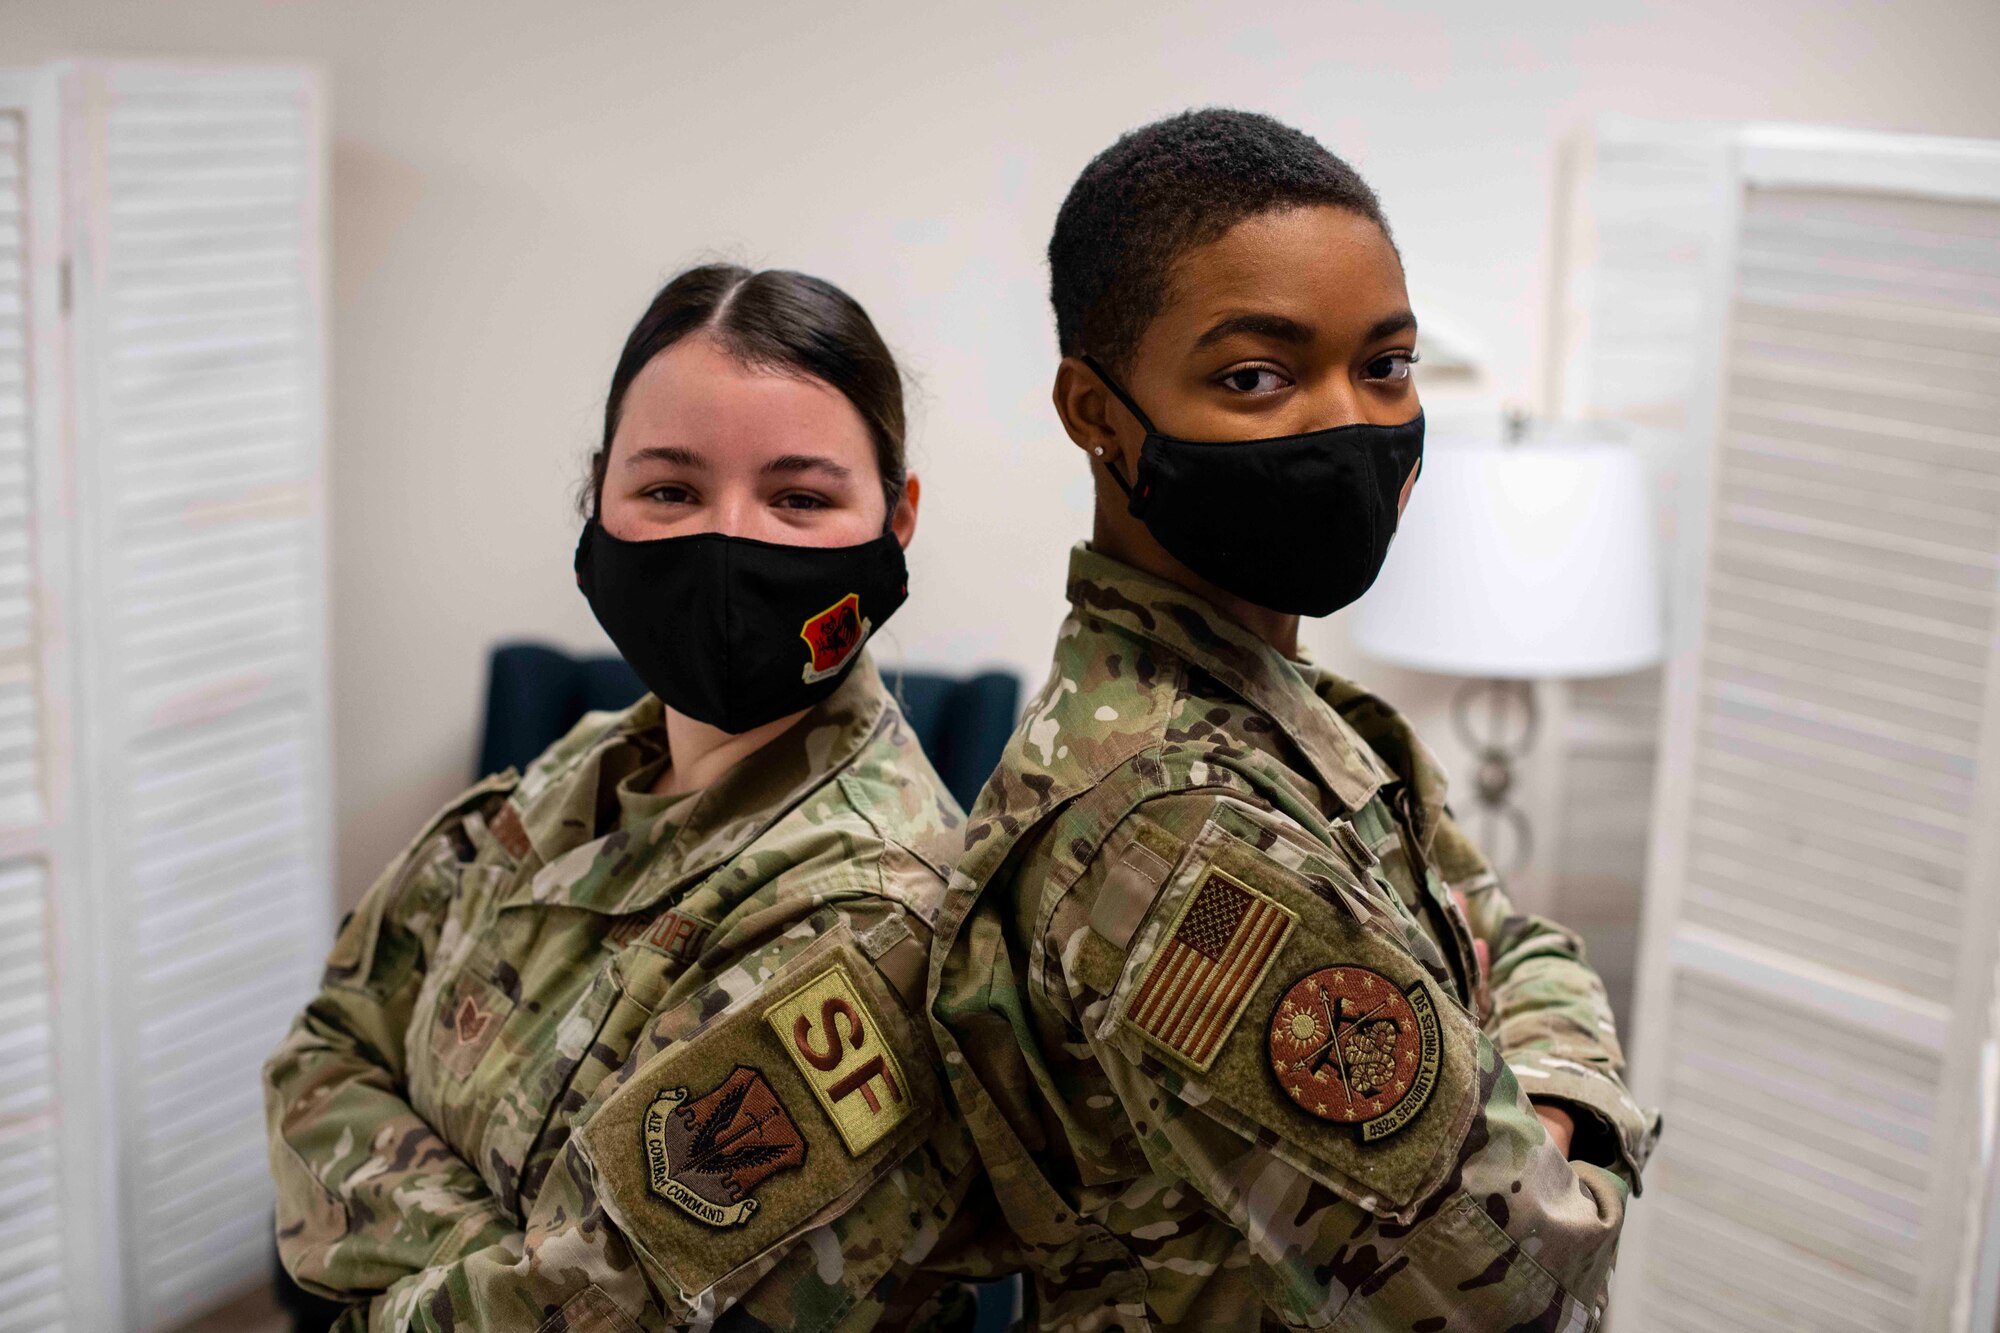 Staff Sgt. Kimberly and Staff Sgt. Laymisha, 432nd Security Forces Squadron Defenders, pose for a photo back to back while looking at the camera.